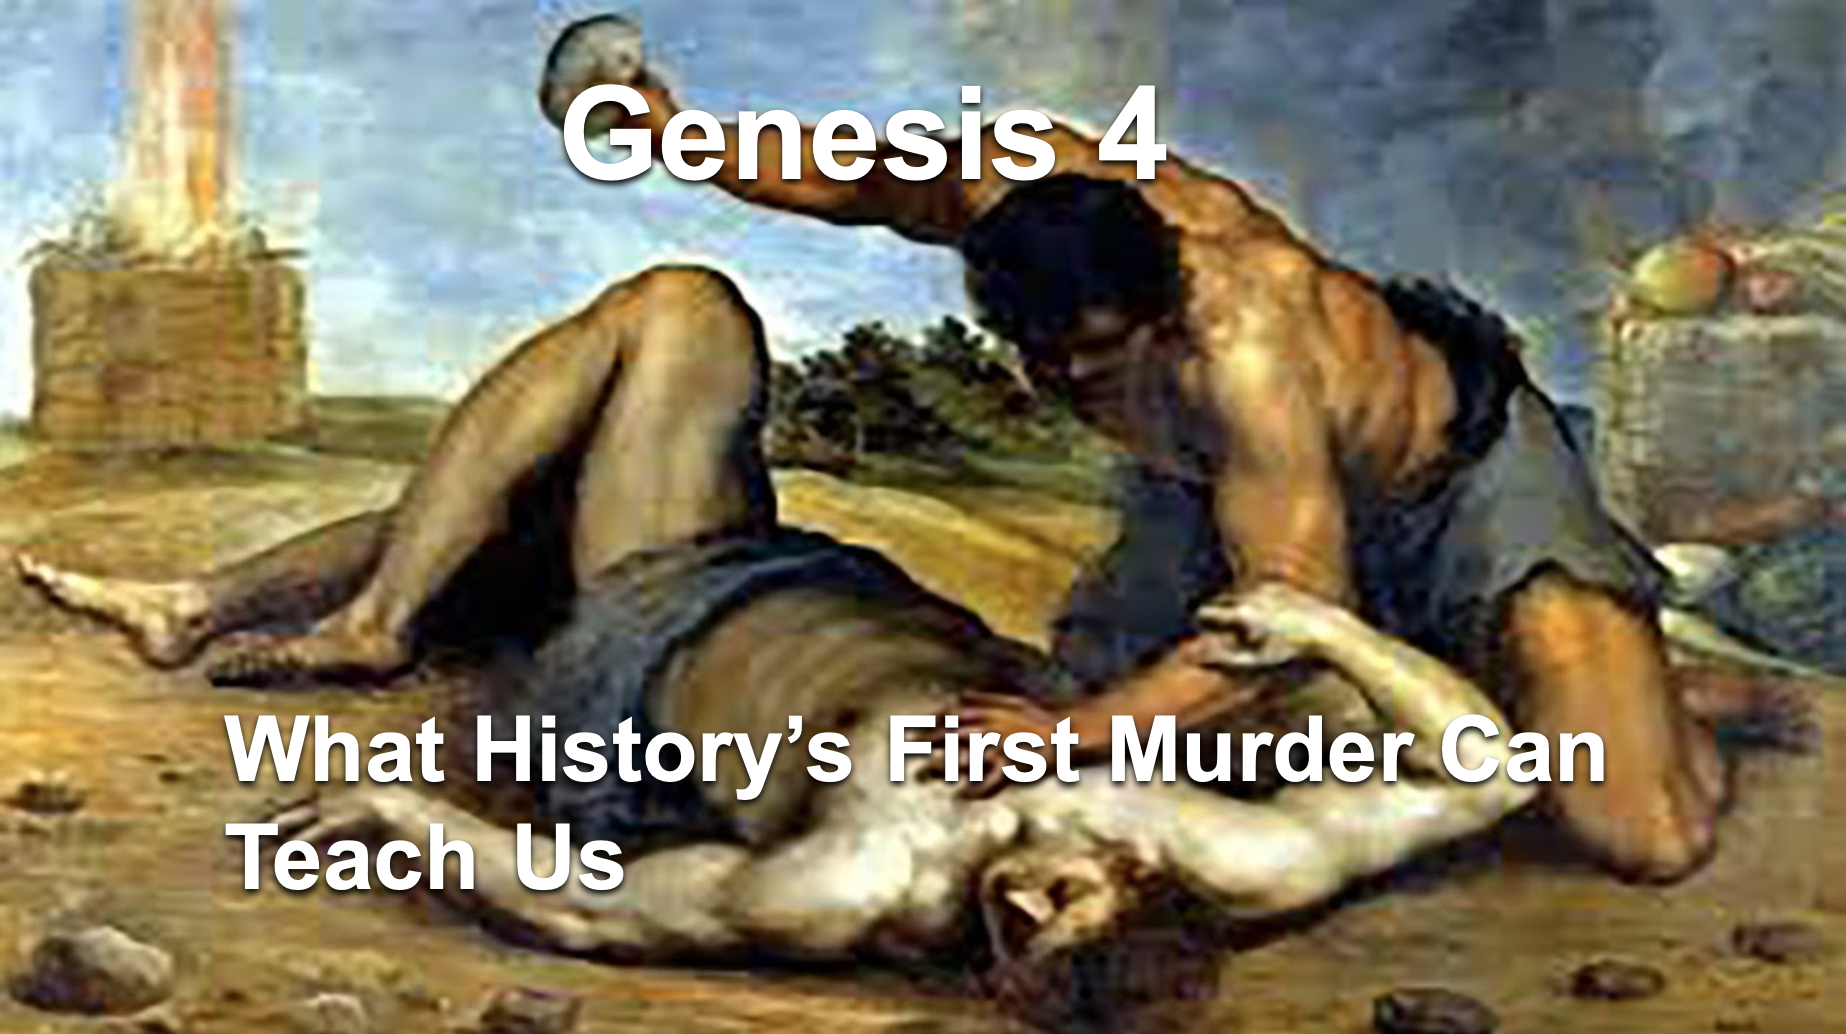 Genesis 4: What History's First Murder Can Teach Us